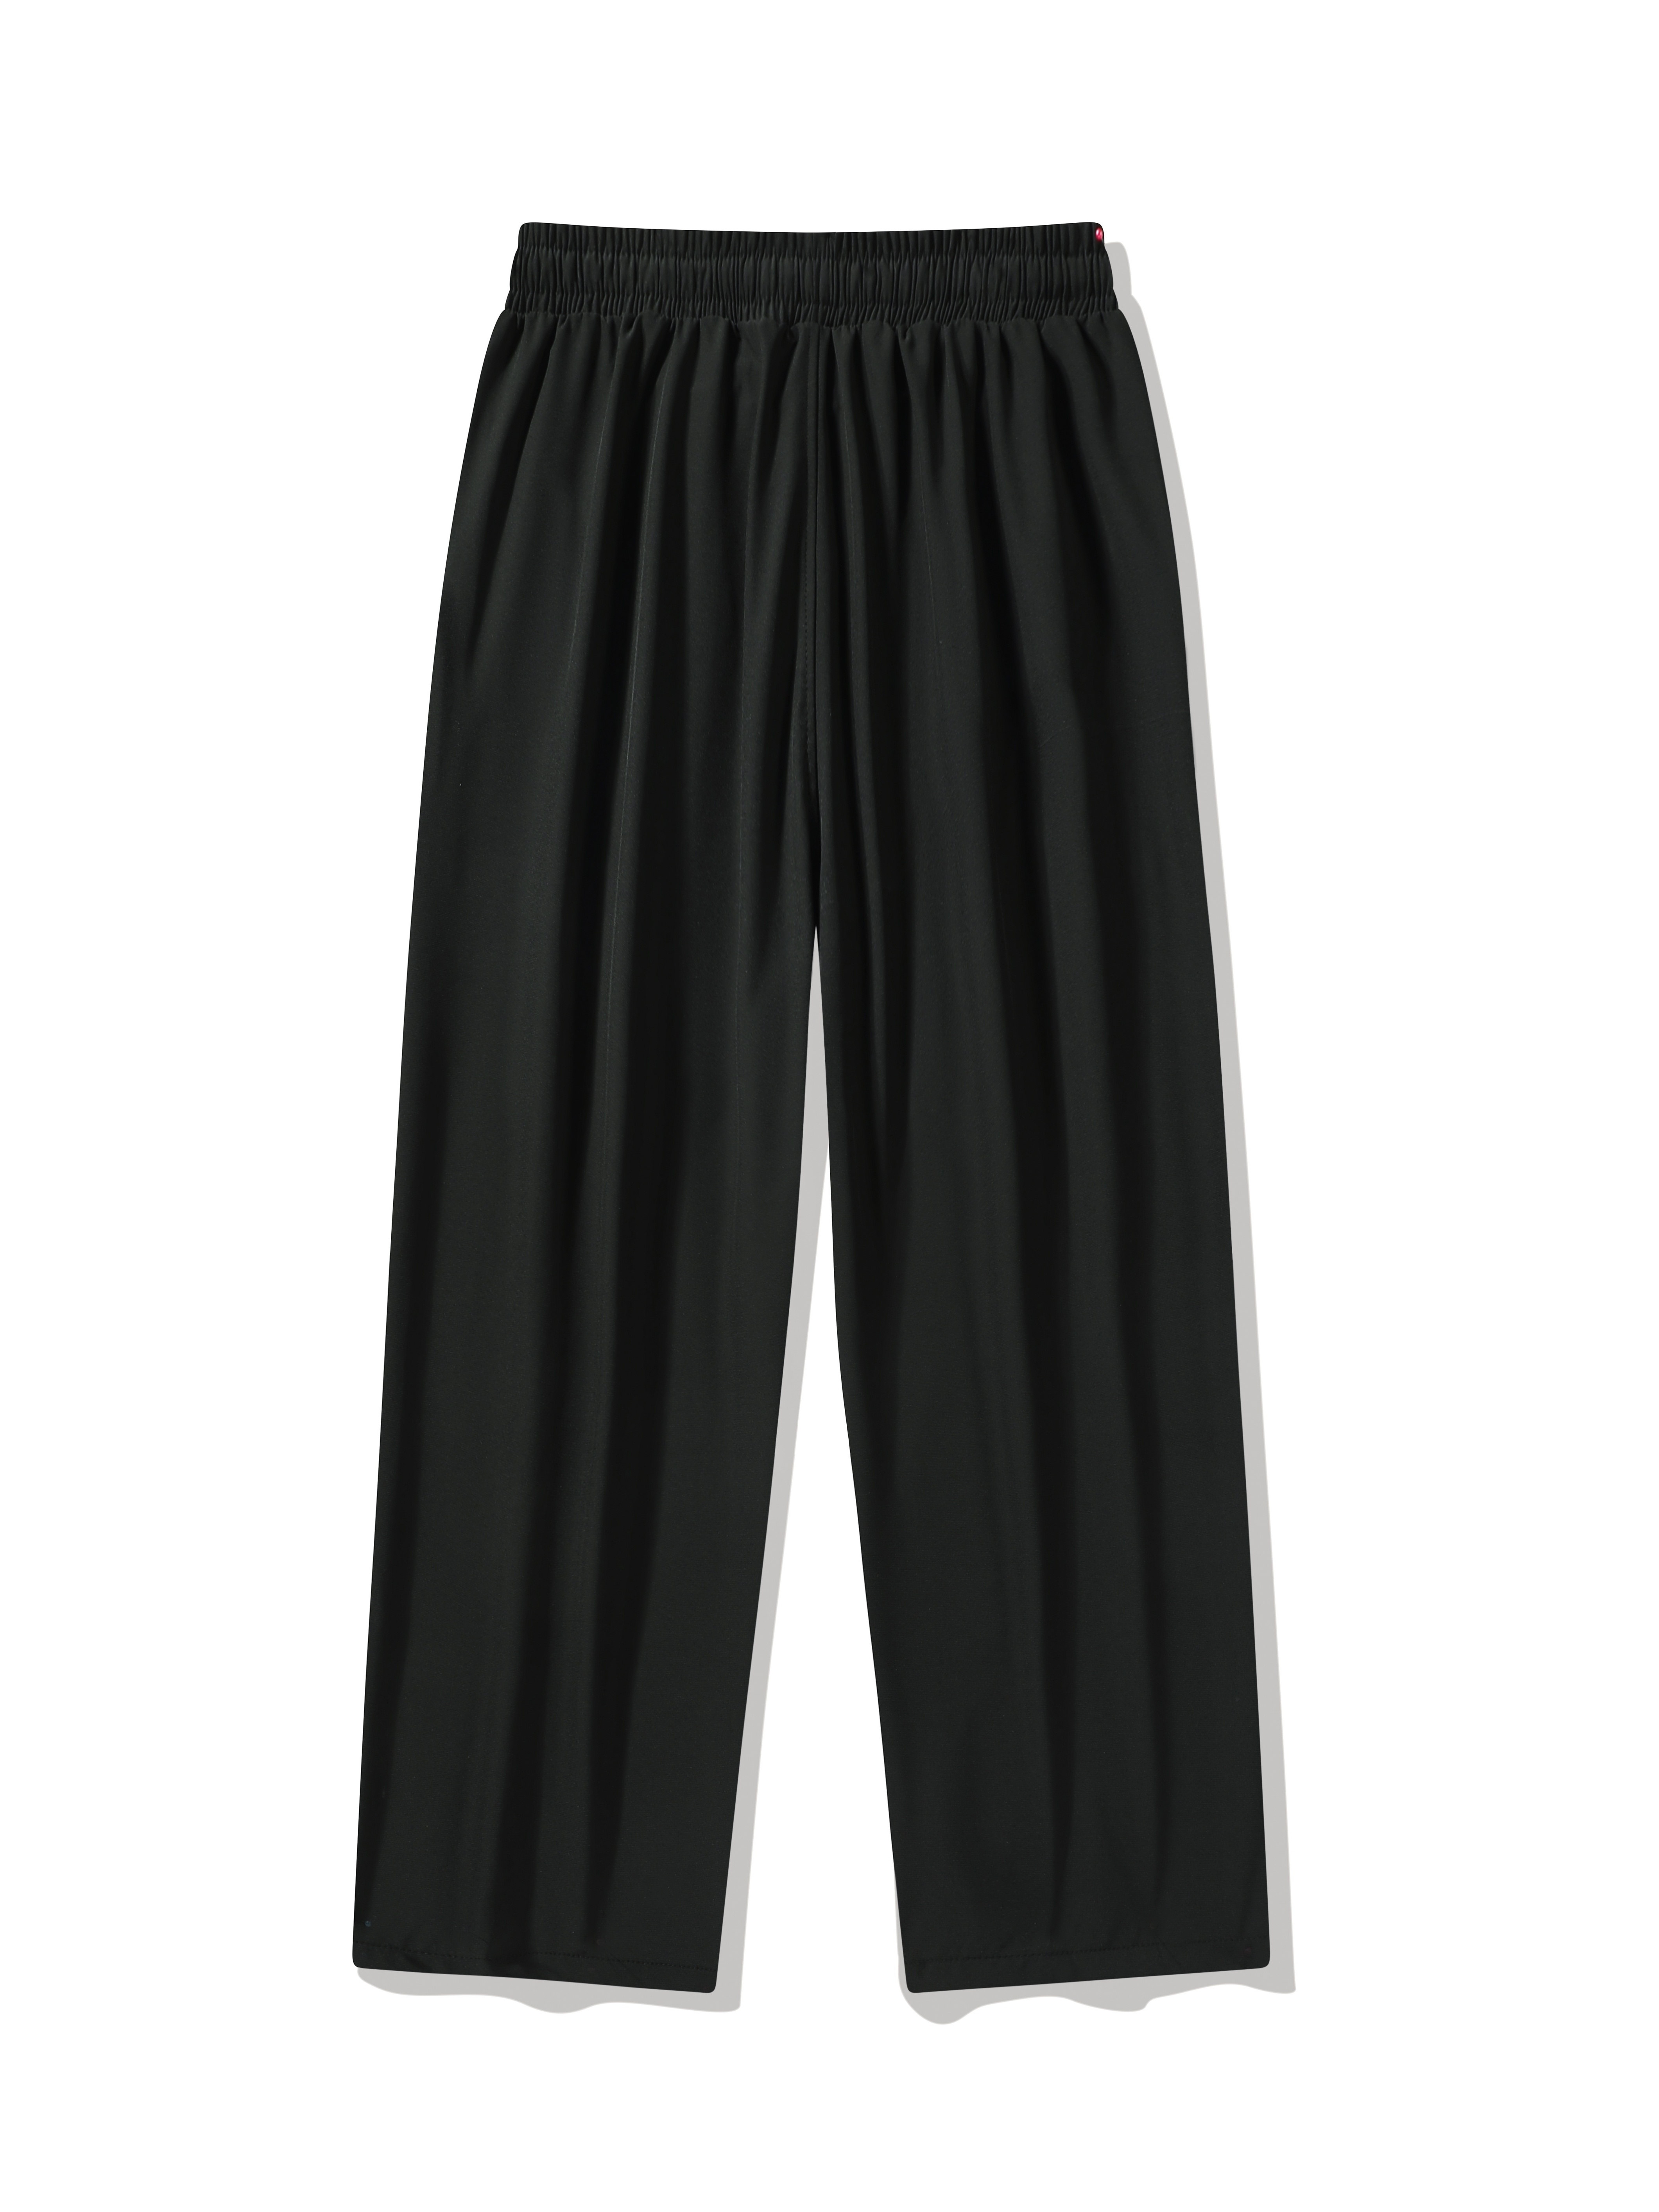 Black Loose Trousers with Big Pockets